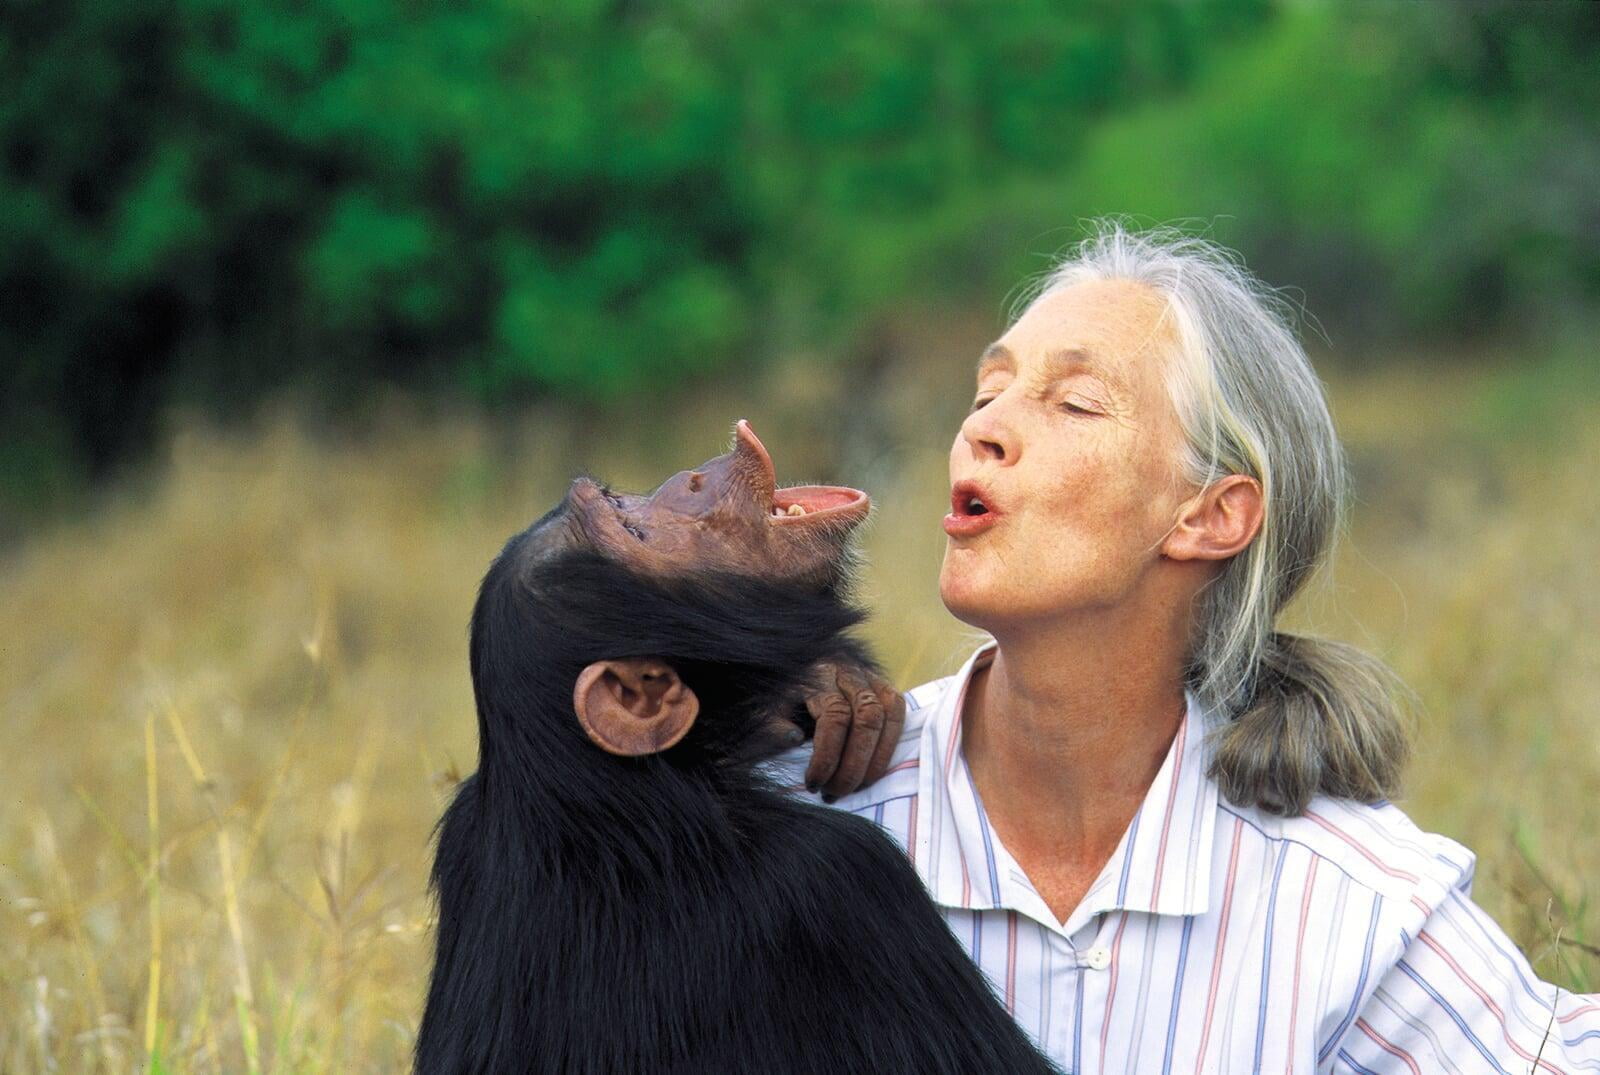 The voice of DrJane Goodall